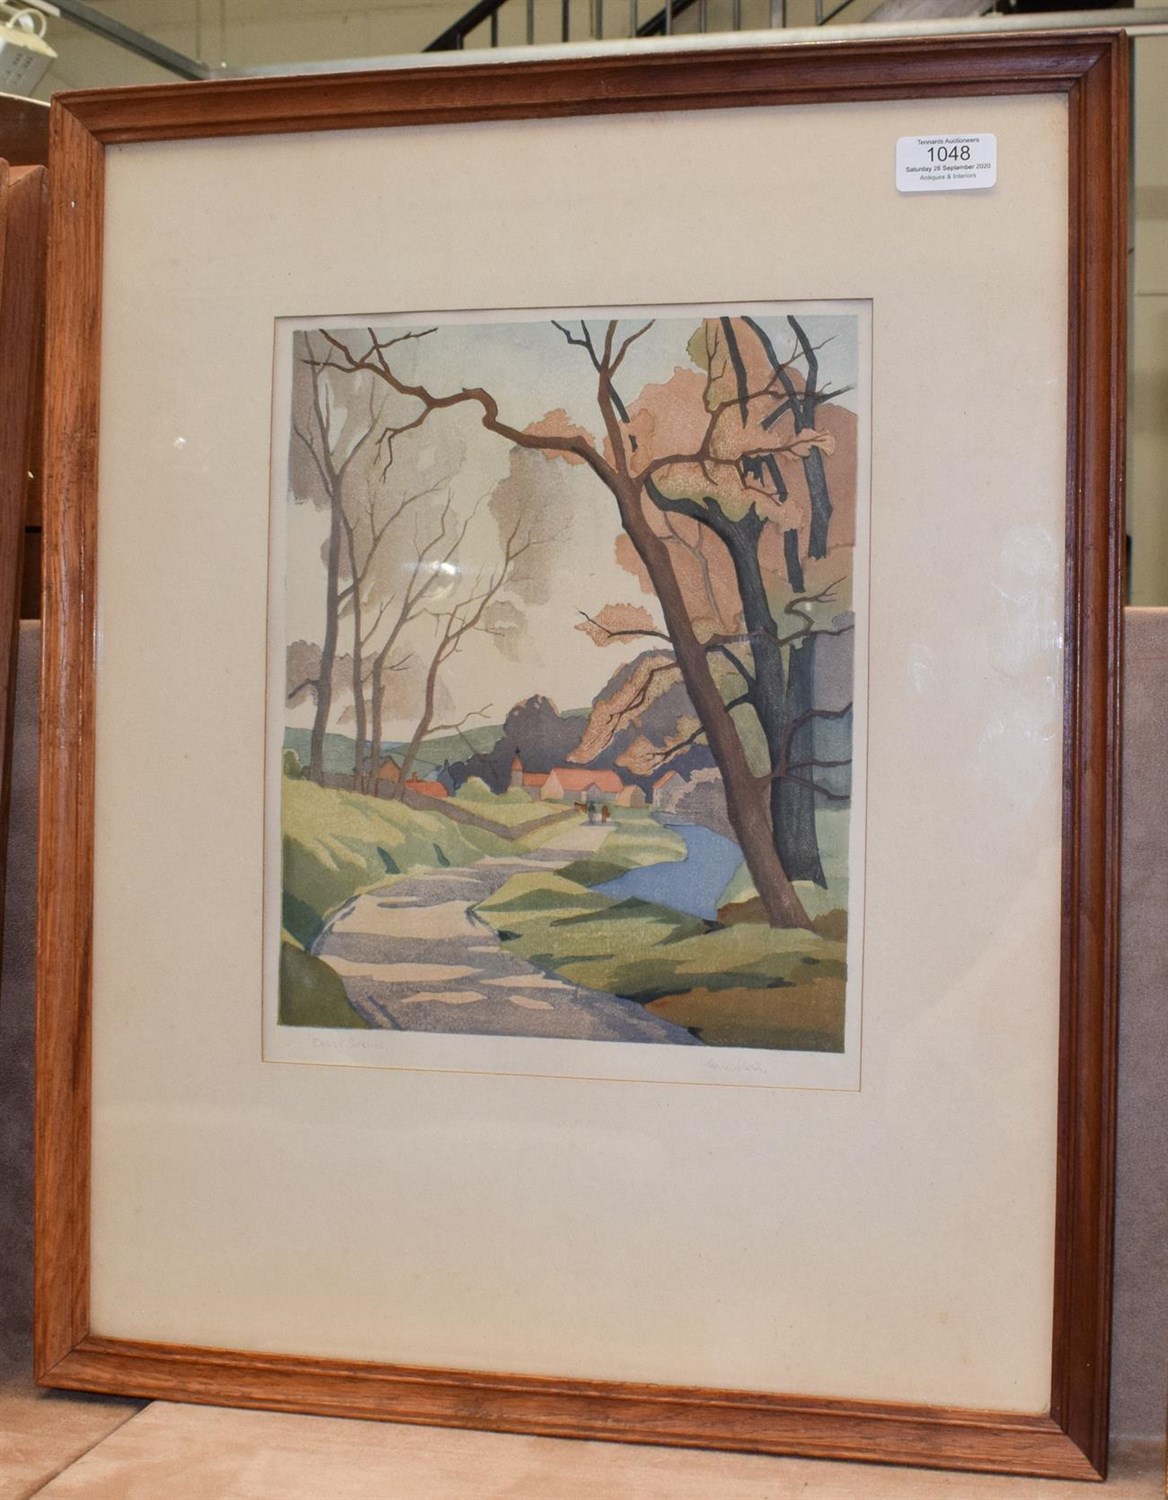 Lot 1048 - Clive Slater (19th/20th century) ''Early Spring'' signed and inscribed, print, 30.5cm by 24.5cm